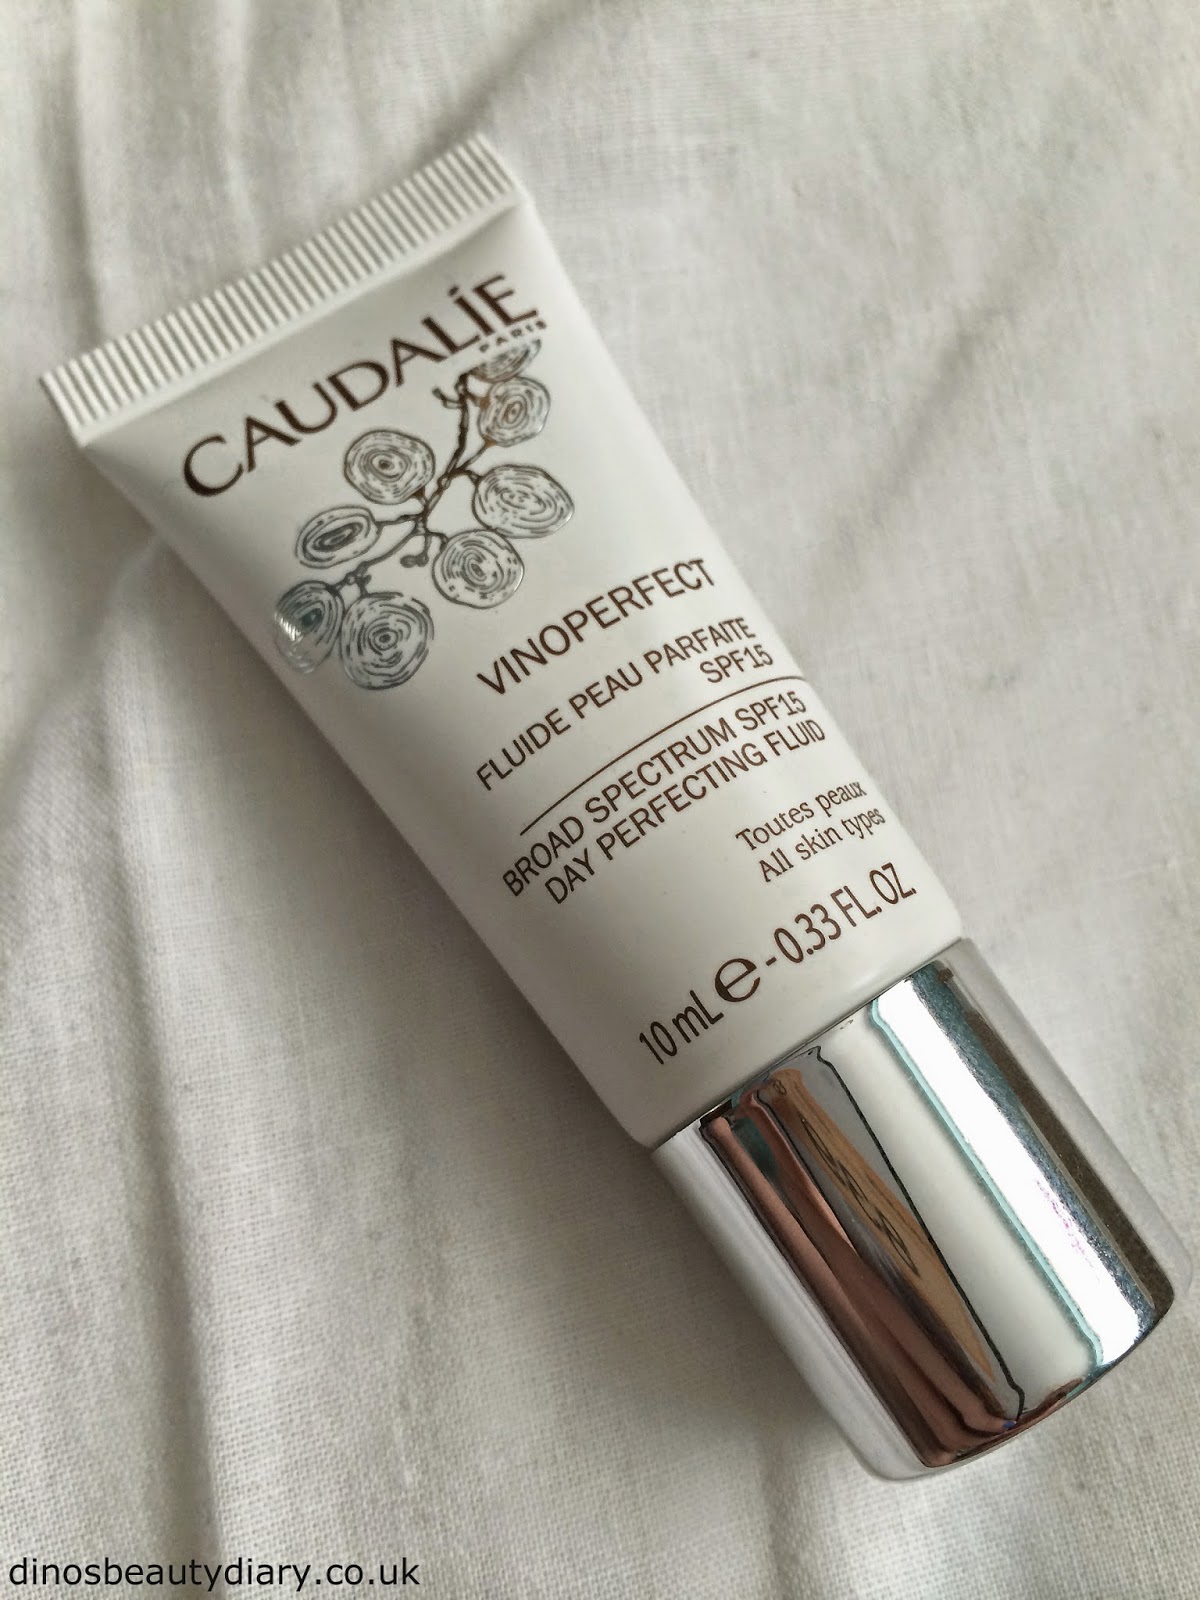 Dinos Beauty Diary - June and July Birchbox - Caudalie Day Perfecting Fluid